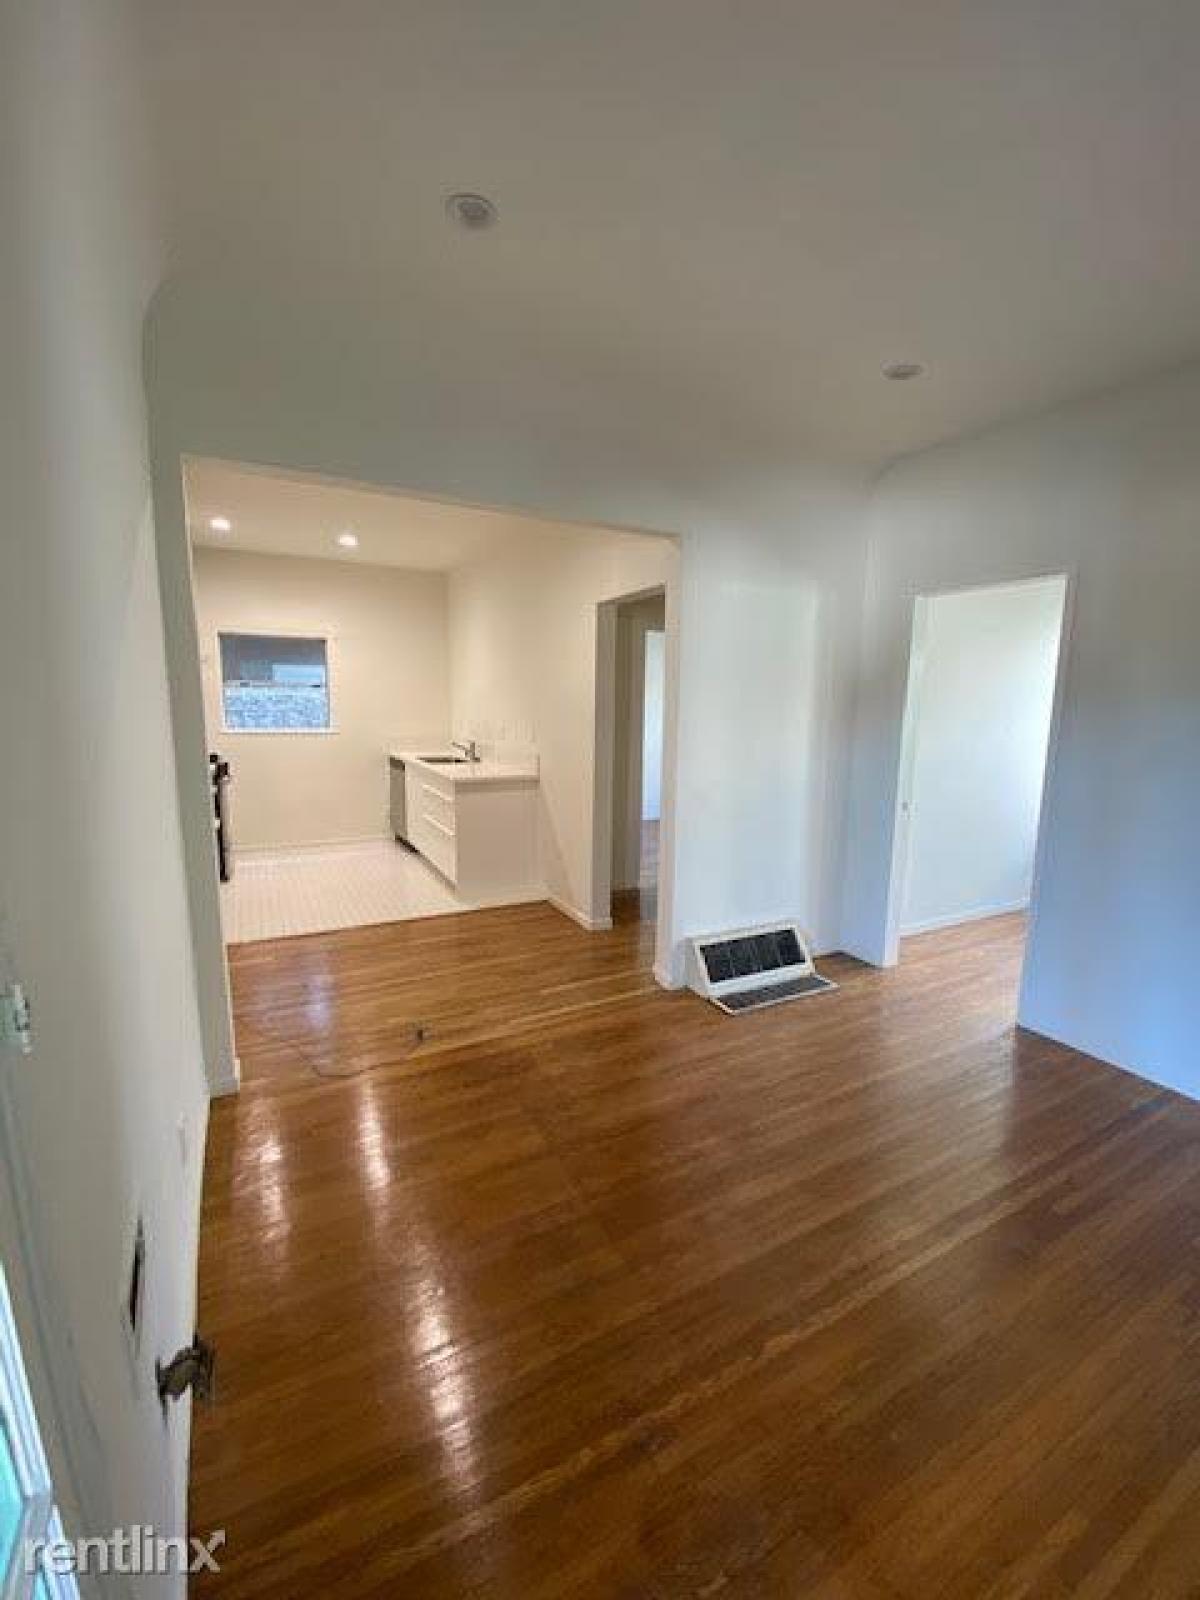 Picture of Apartment For Rent in Alhambra, California, United States